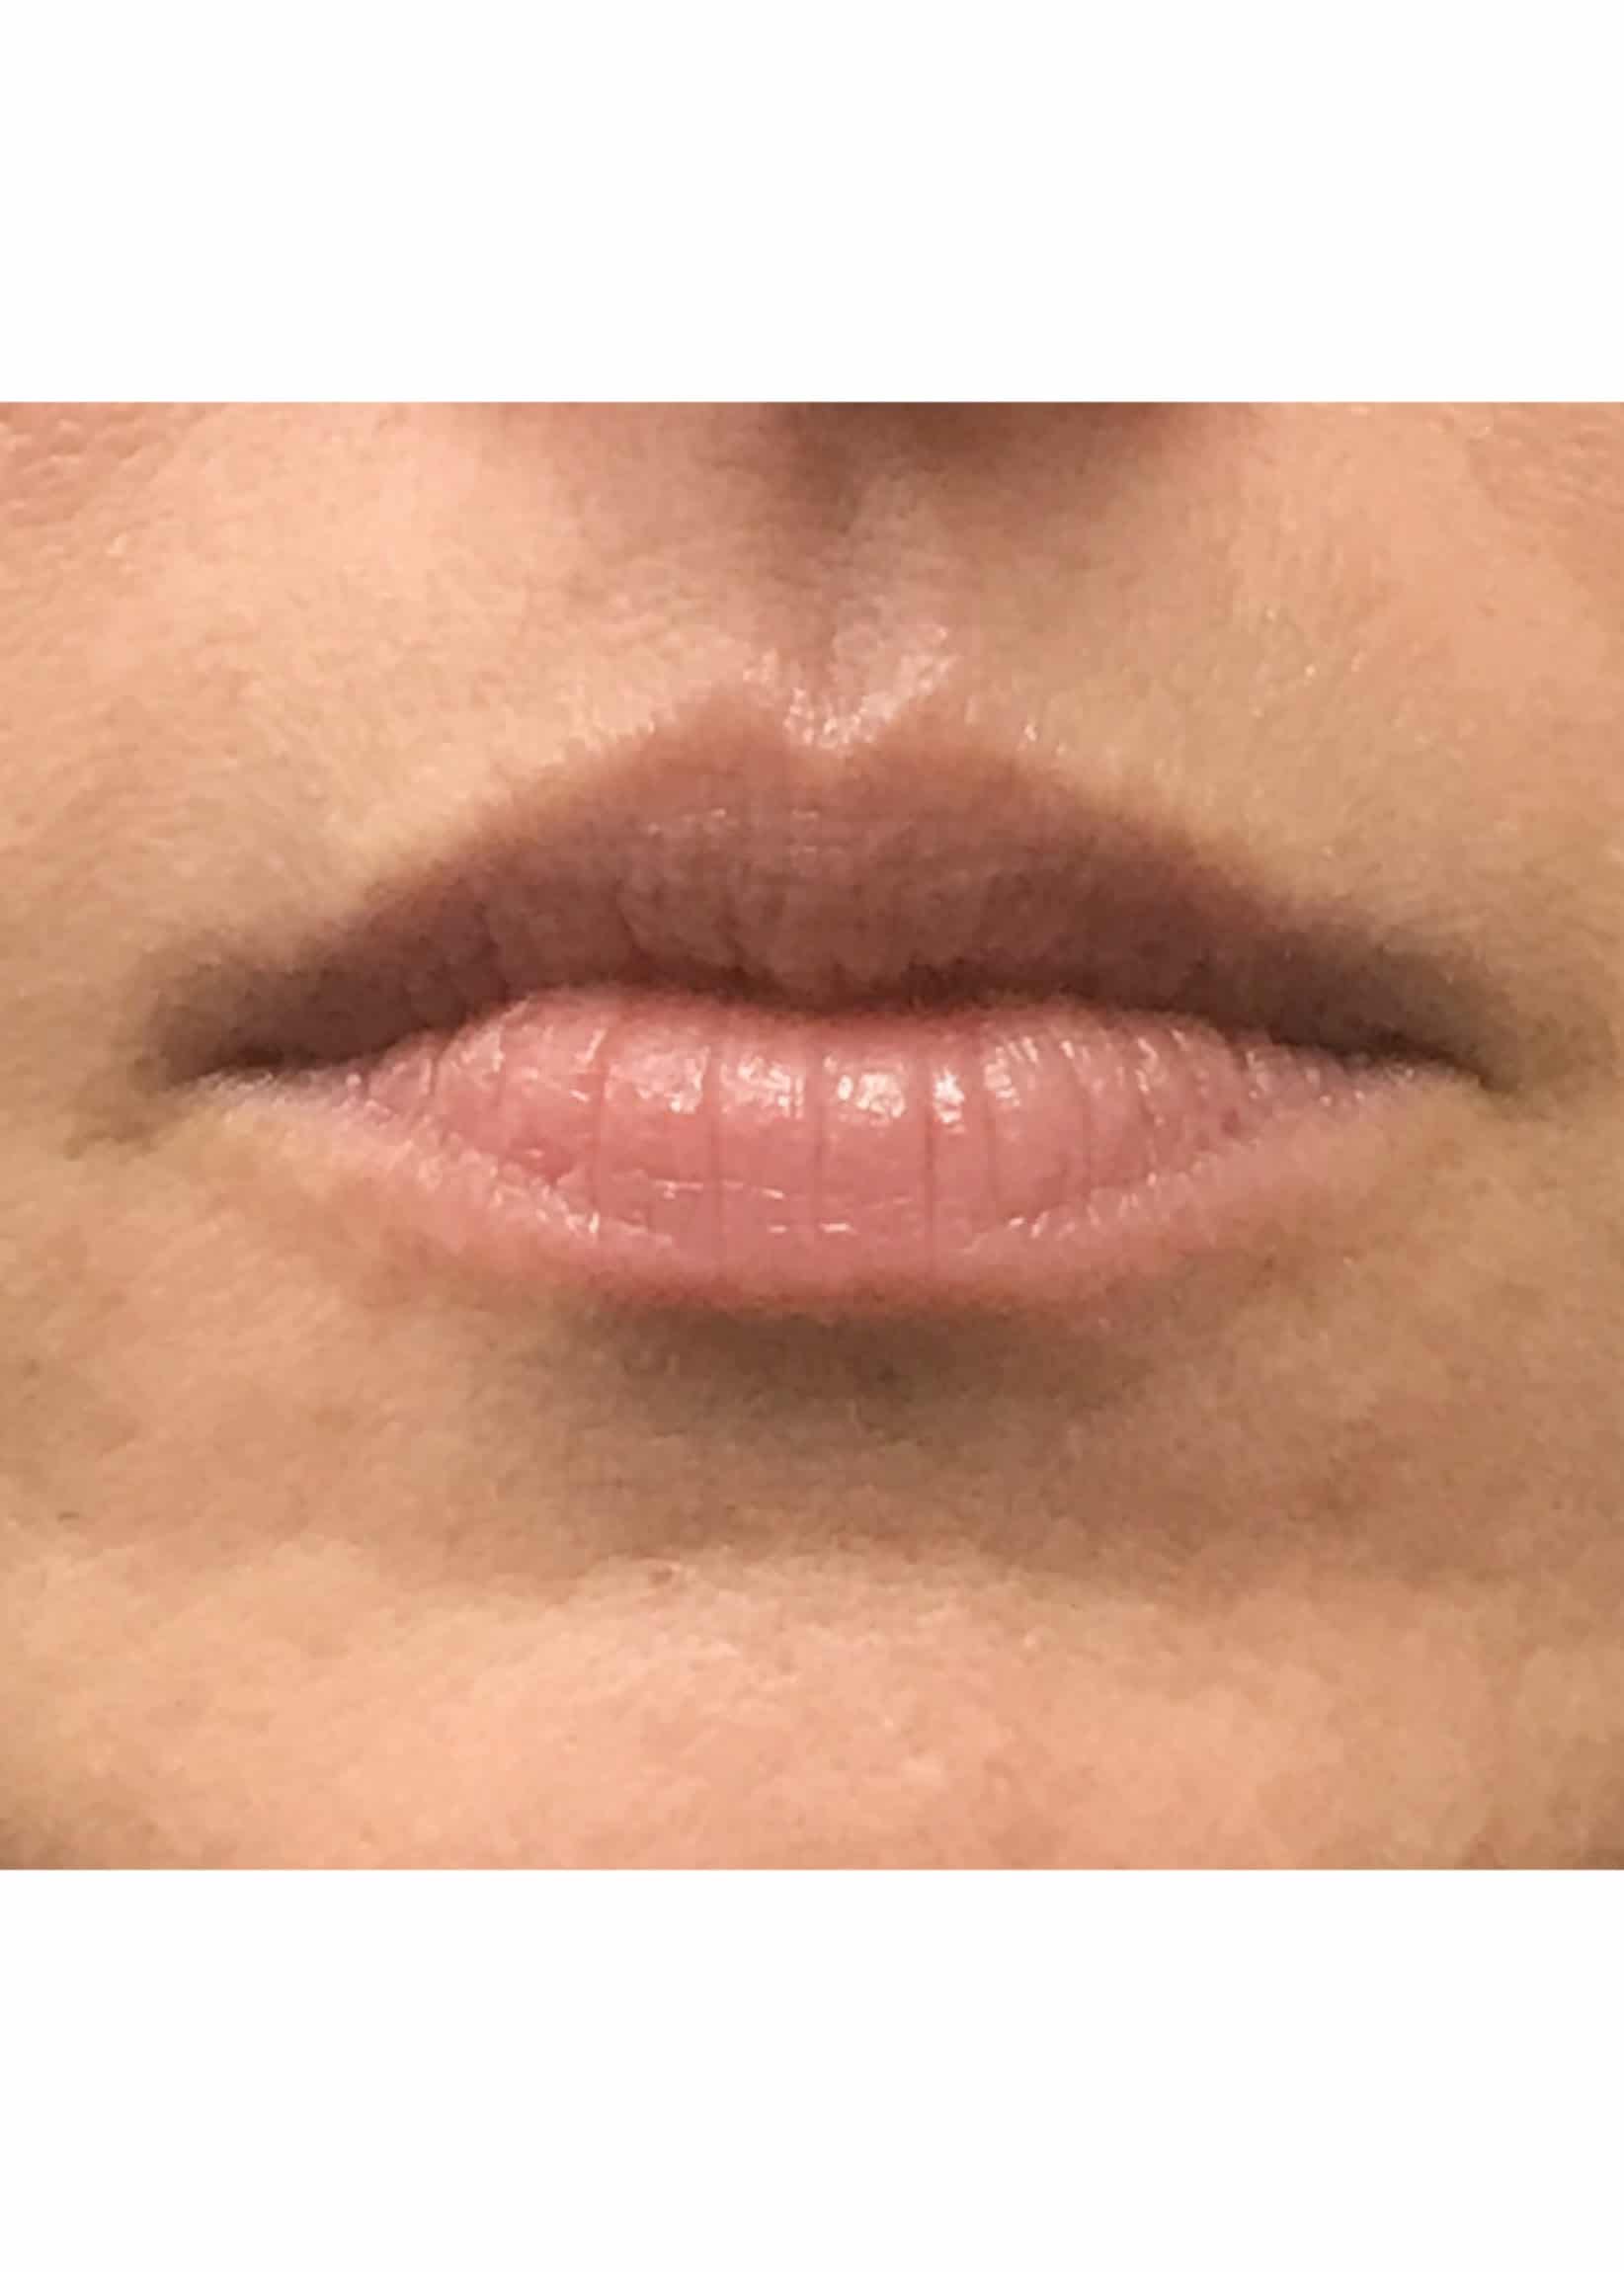 TheSkinCenter ProviderPages AngieKyne LipFiller Before 2 scaled 1